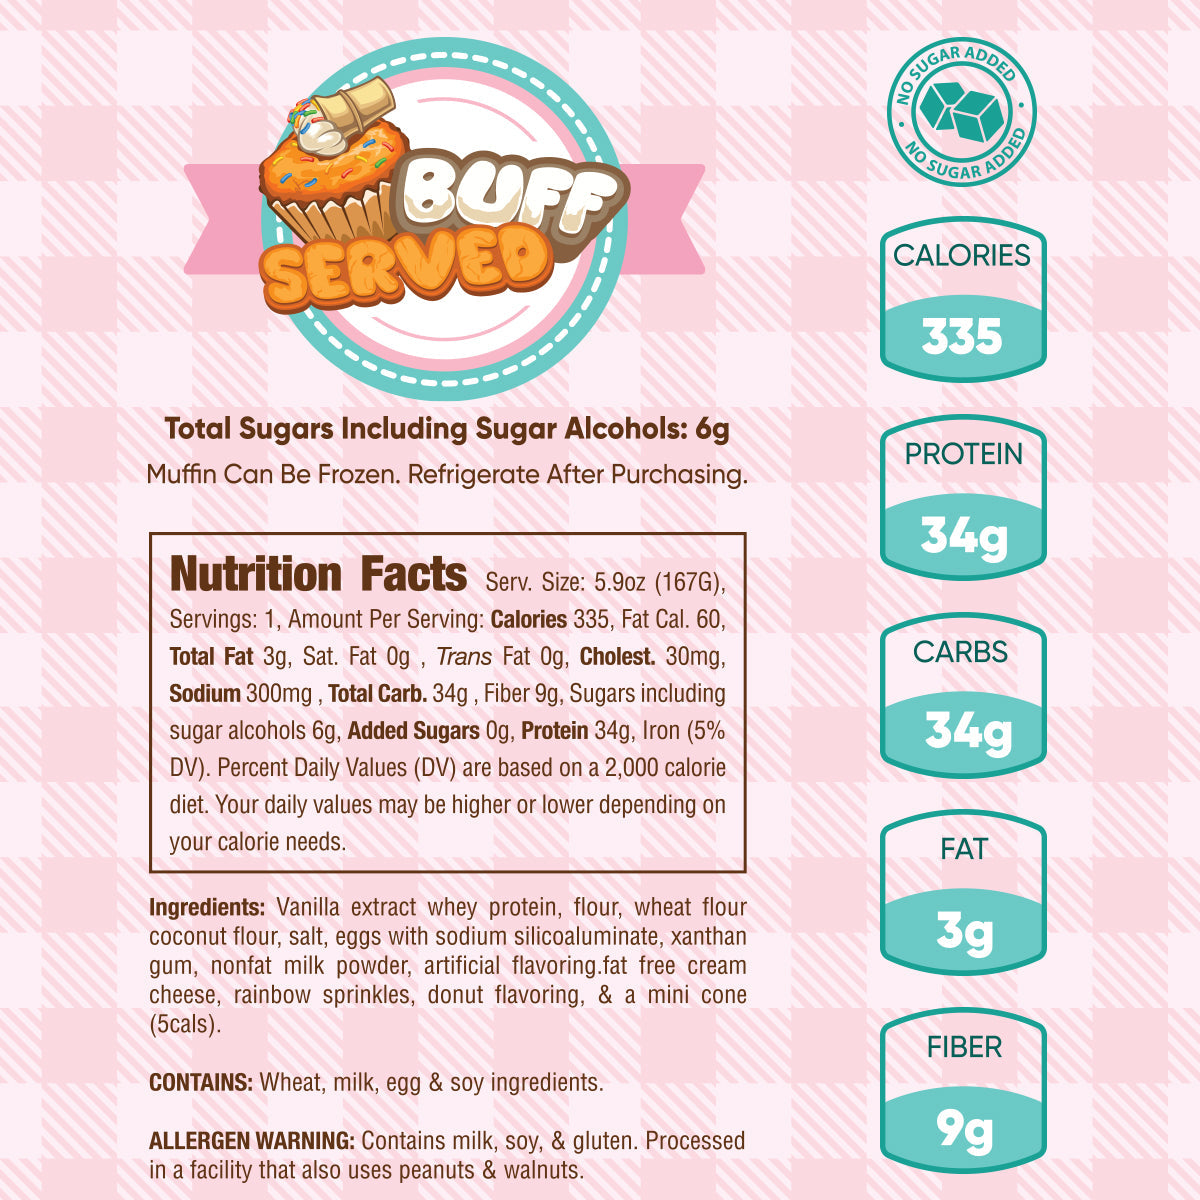 buff served muffin nutrition facts